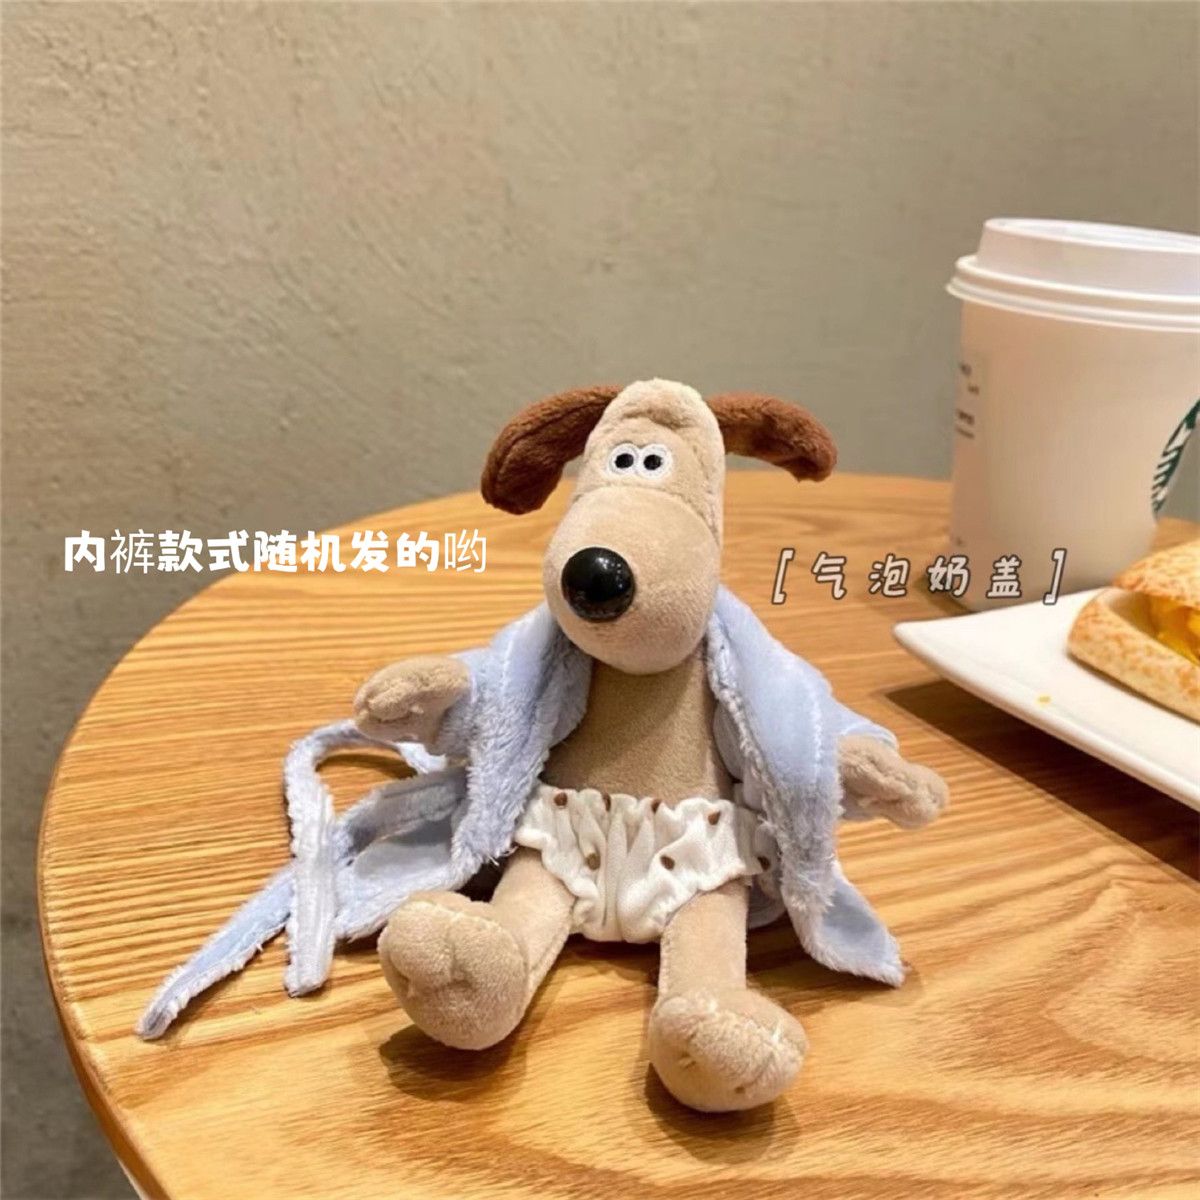 Wallace and Gromit Pendant Cute Plush Bathrobe Doll Couple Keychain Student Schoolbag Pendant Gift